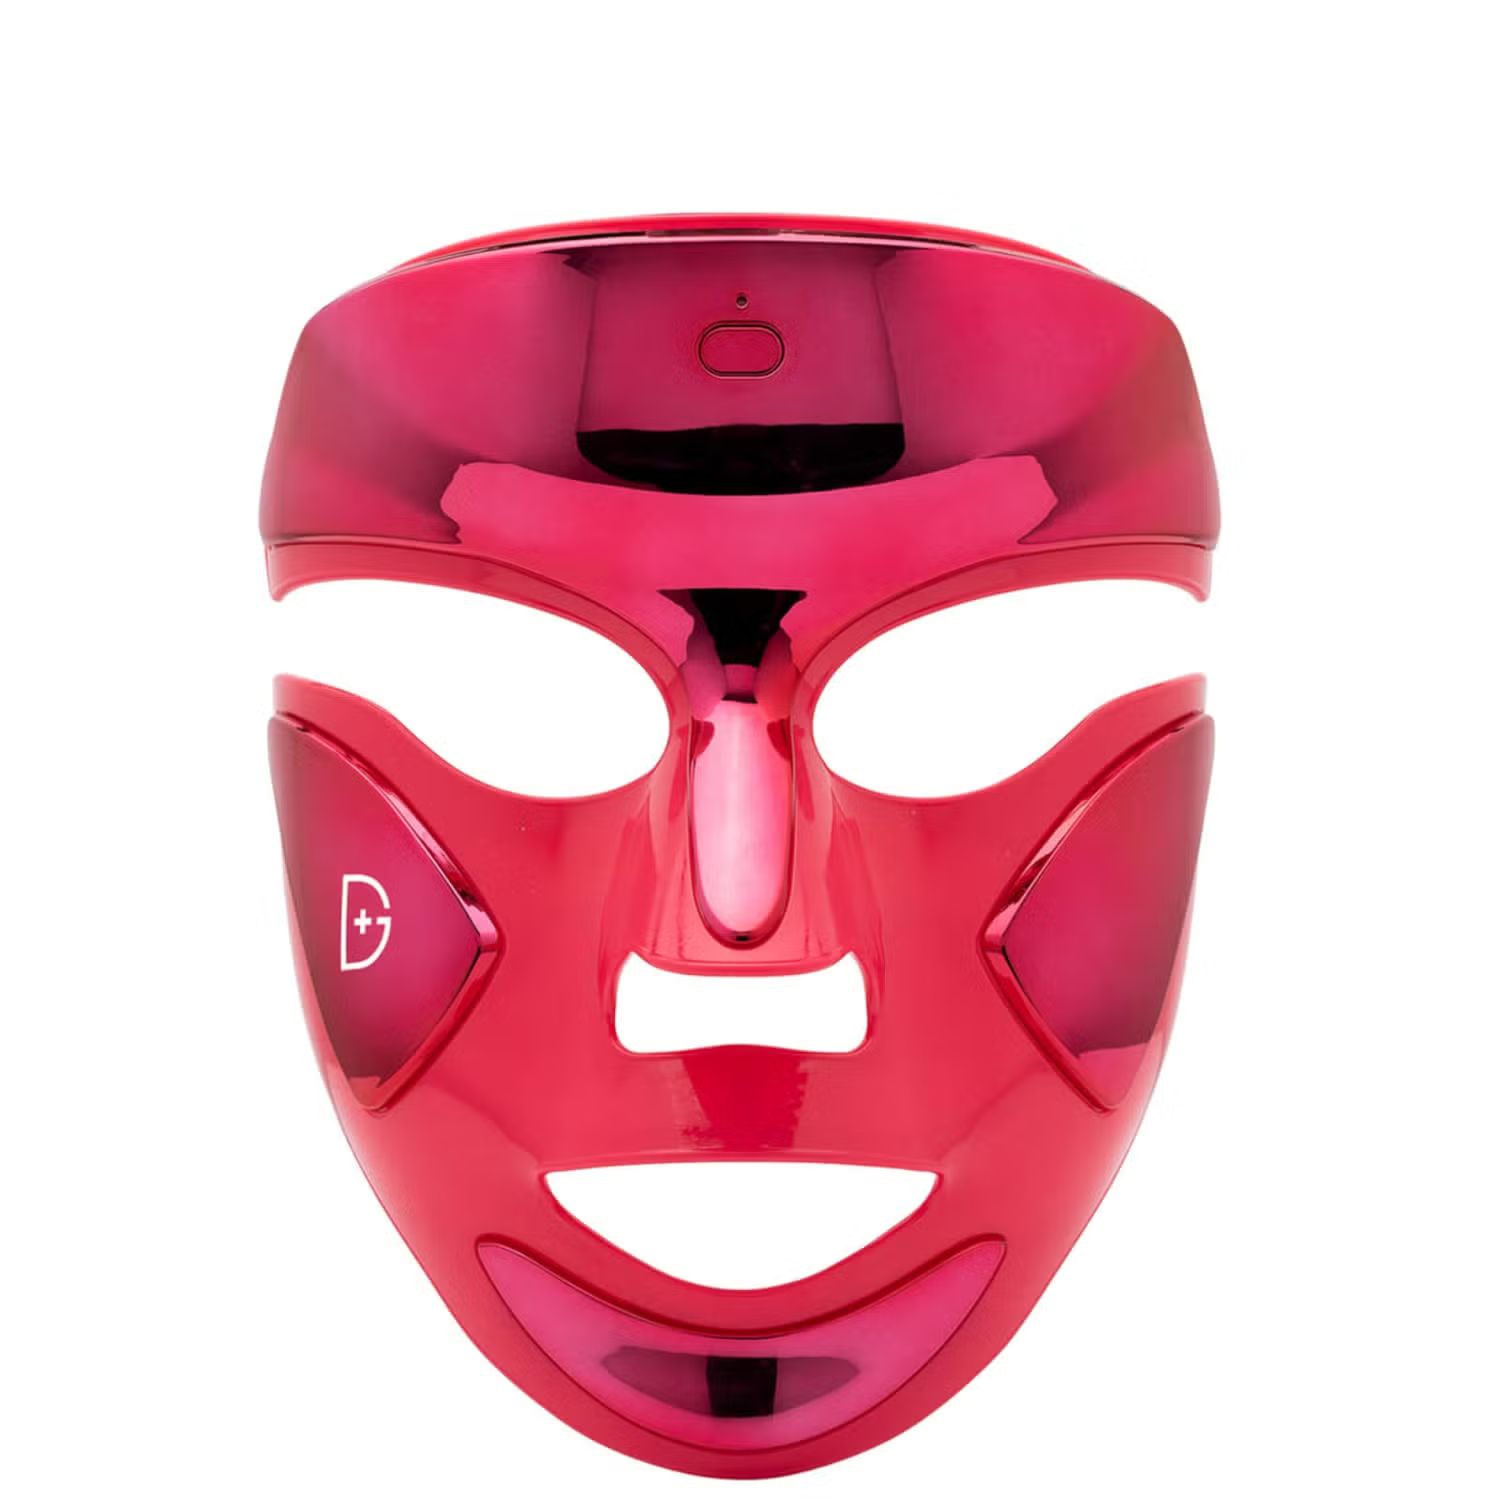 Dr Dennis Gross Skincare Limited Edition Magenta FaceWare Device | Cult Beauty